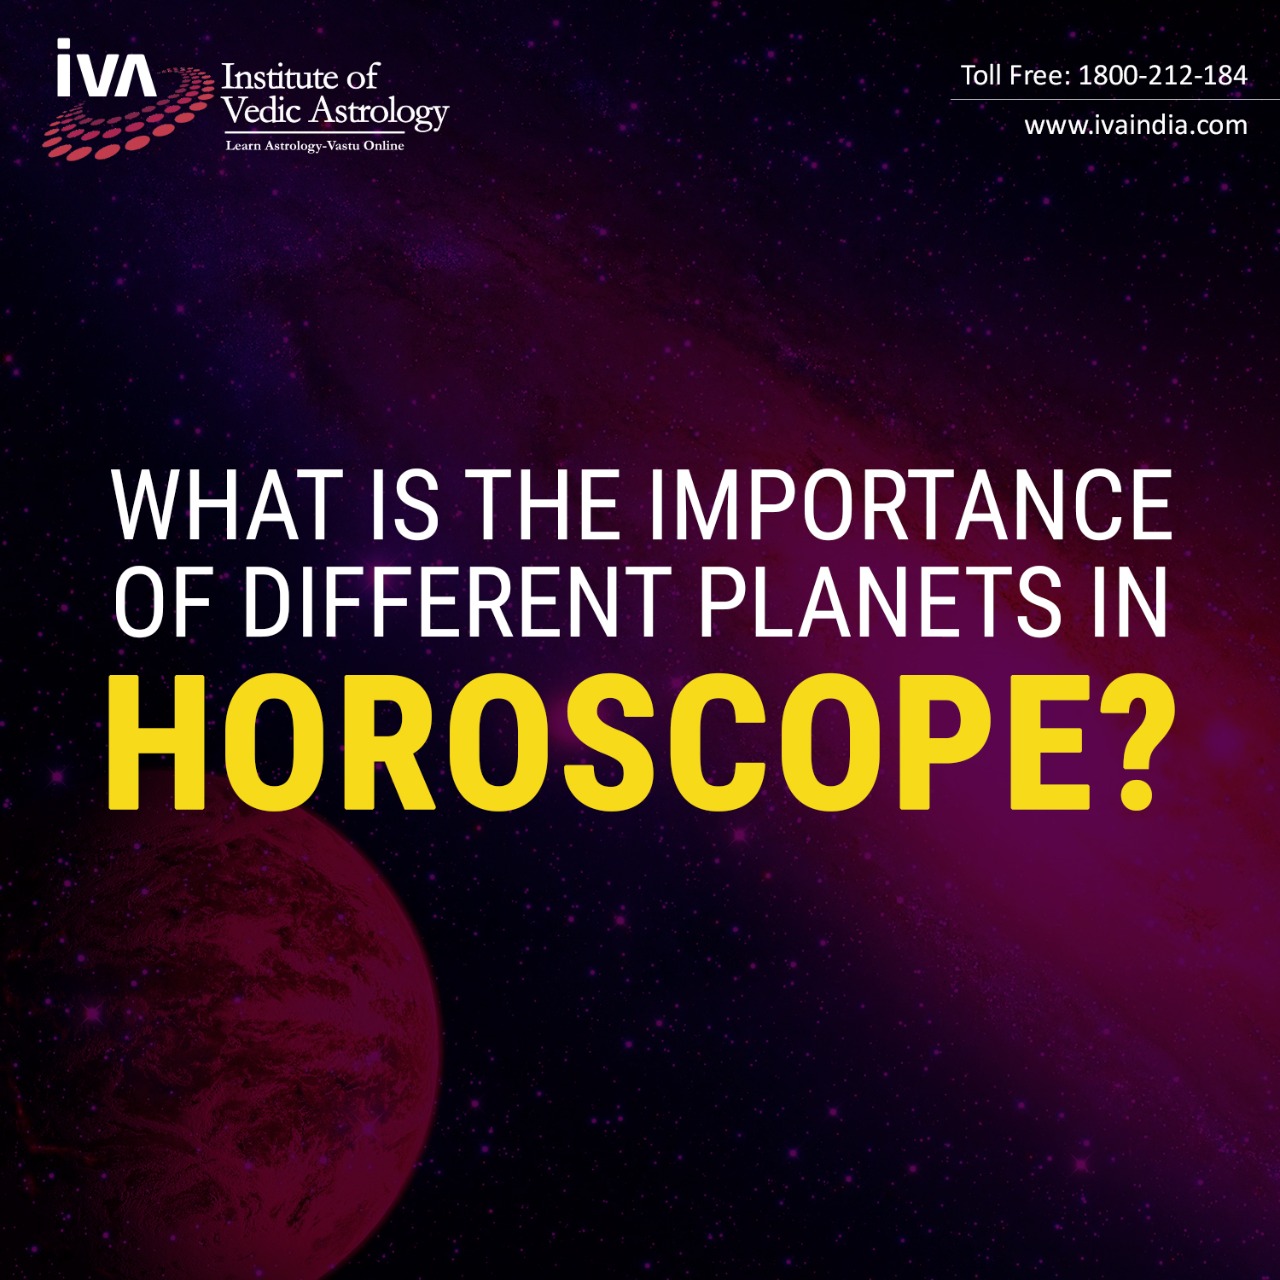 Importance of Different Planets in Horoscope